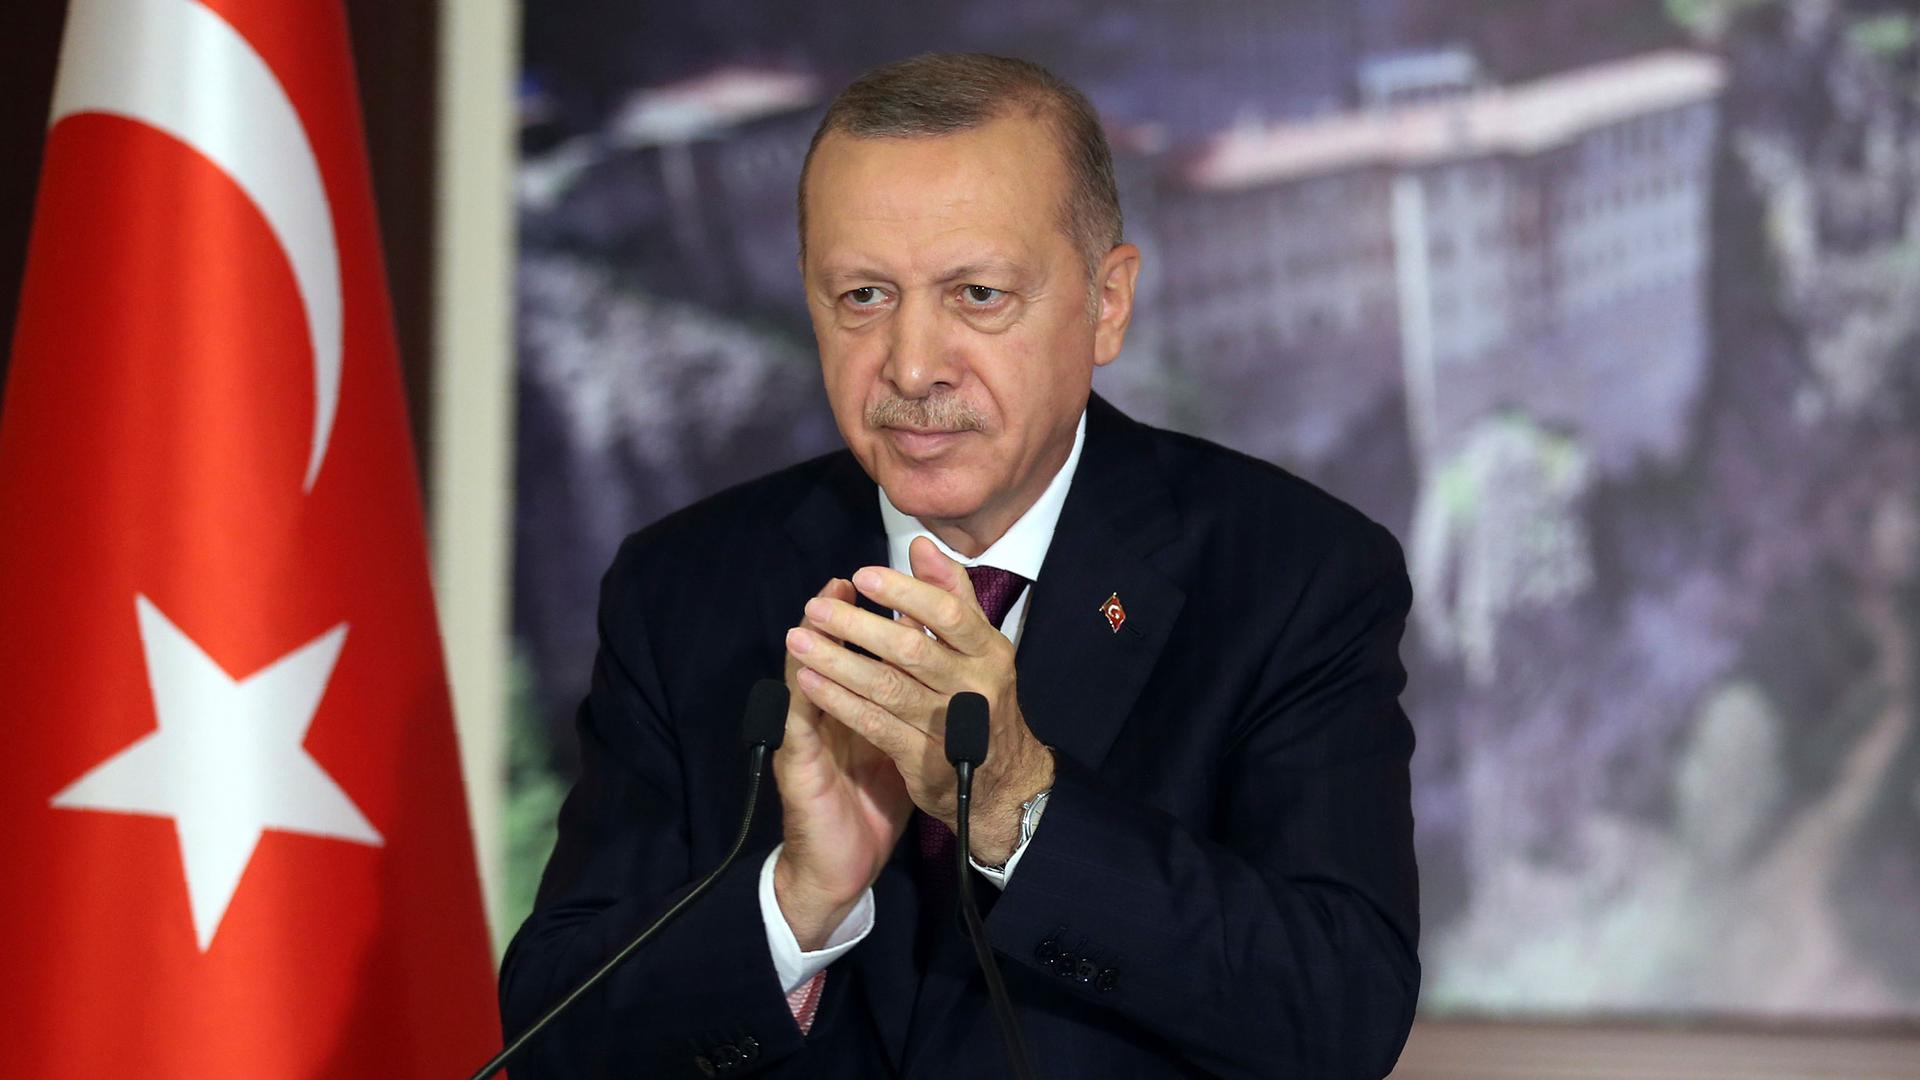 Turkey's President Recep Tayyip Erdoğan is shown wearing a dark suit and standing behind a microphone with a Turkish flag nearby.